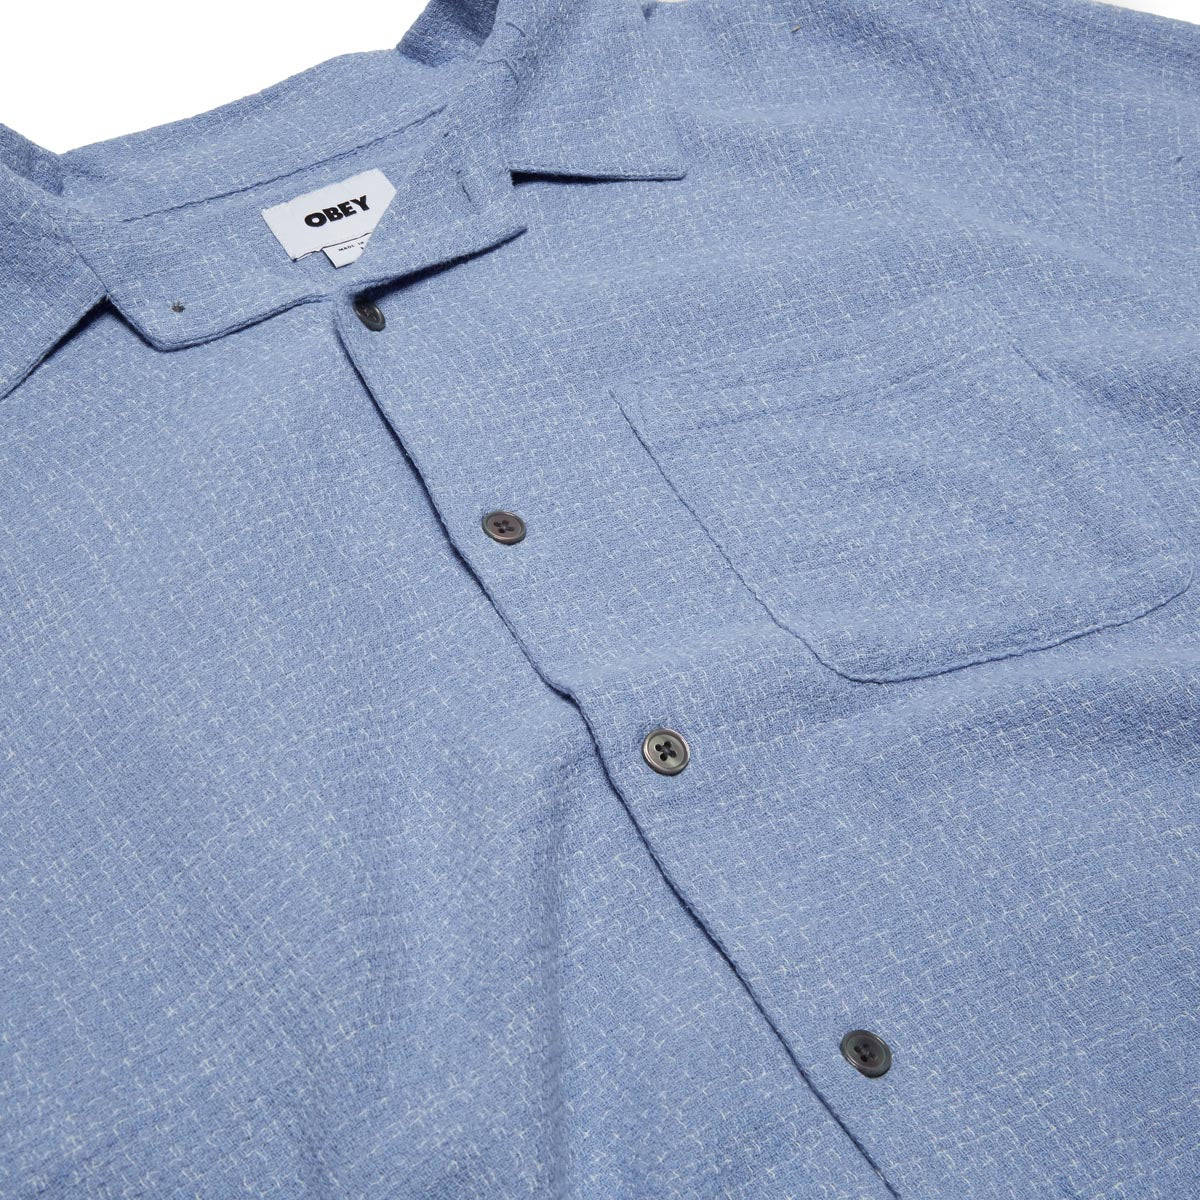 Obey Feather Woven Shirt - Hydrangea image 3